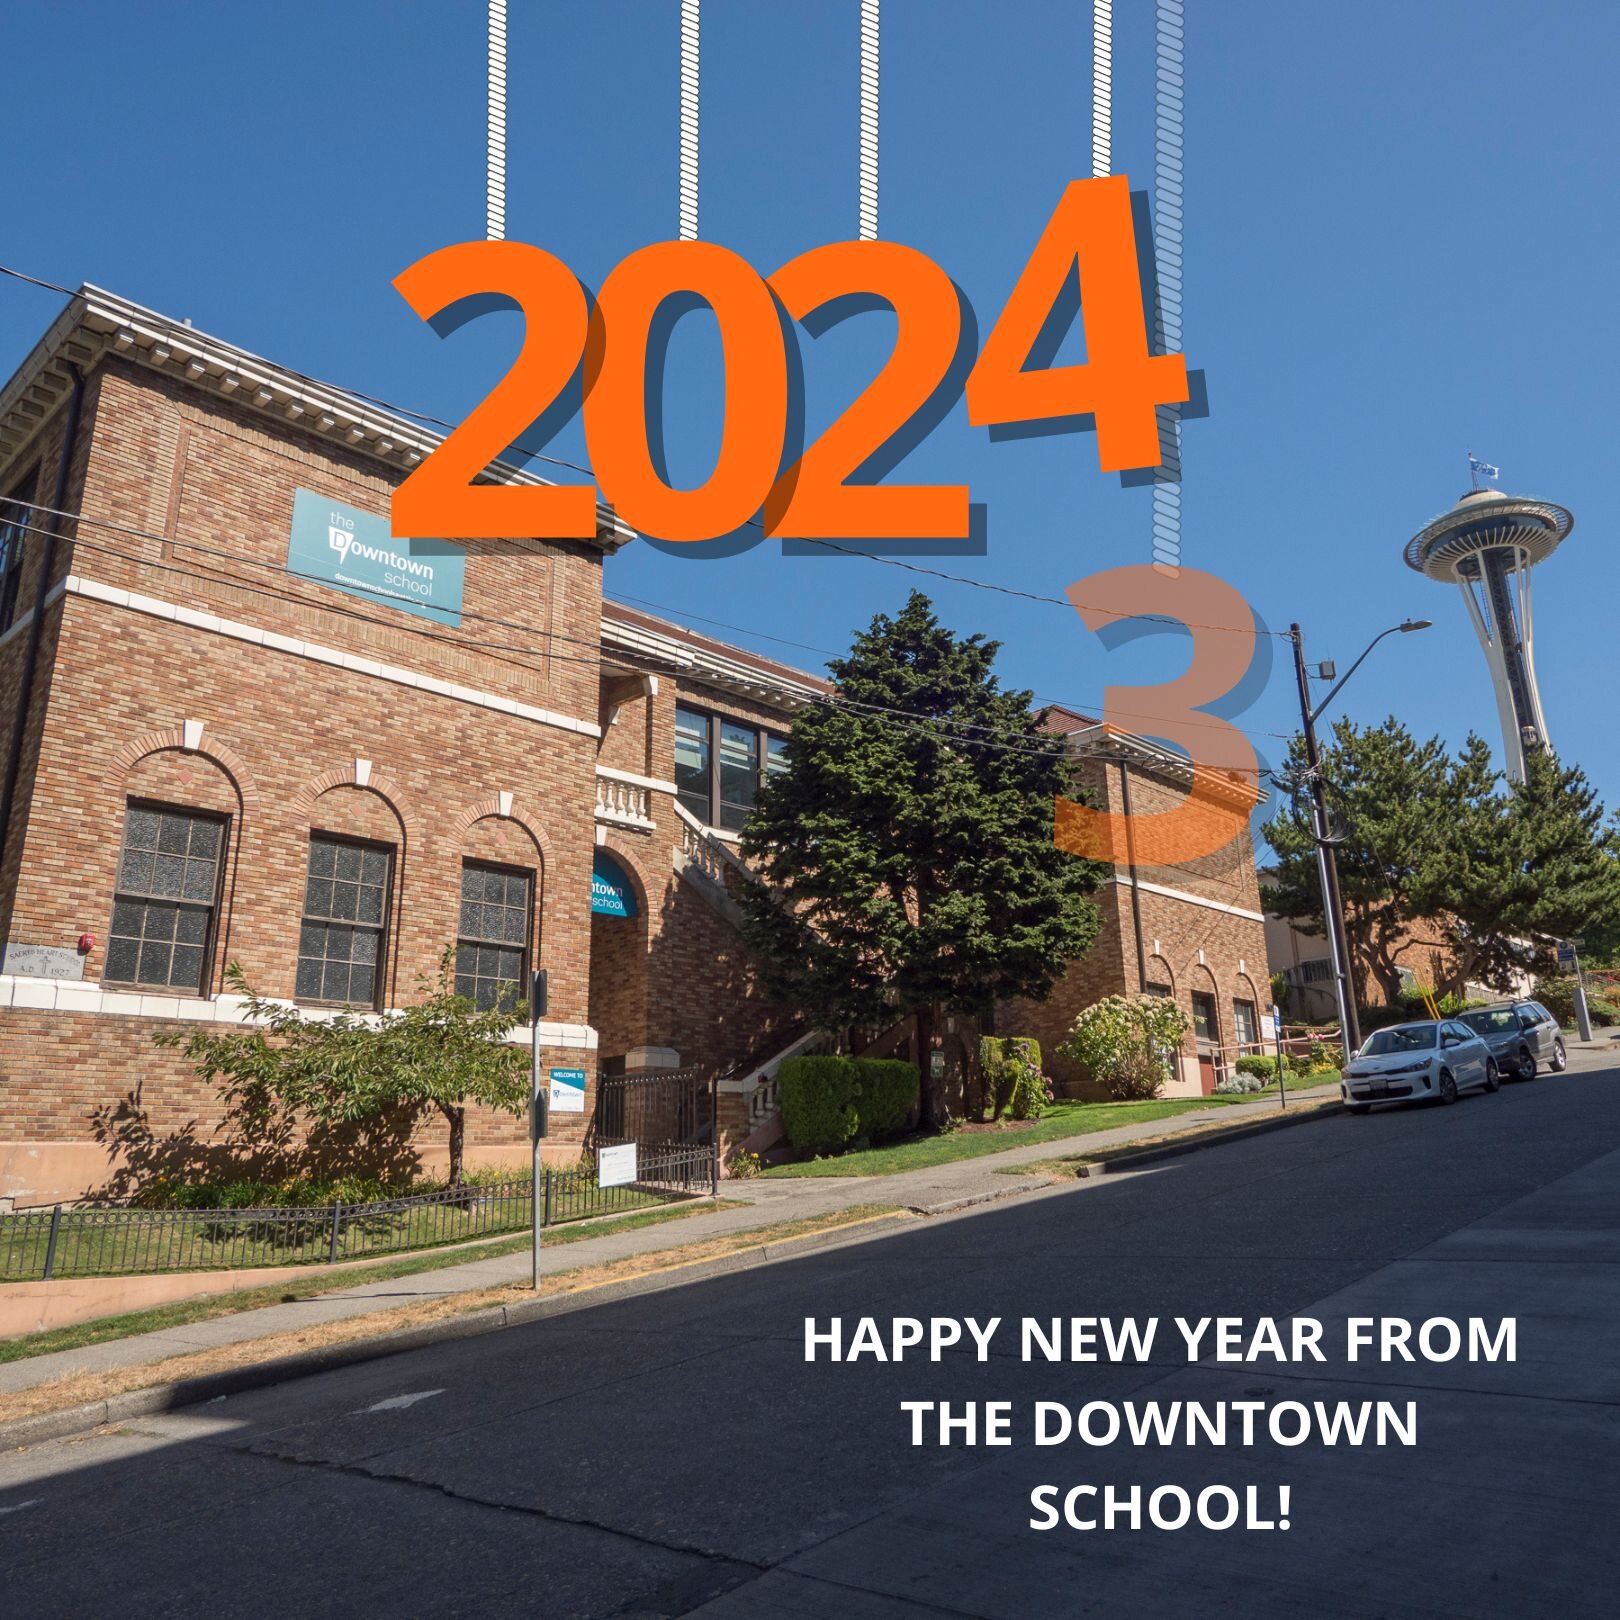 We wish you a wonderful 2024, filled with learning, community, and connections! #happynewyear #newyear #happy2024 #happyholidays  #newyearseve #newyearsday #2024